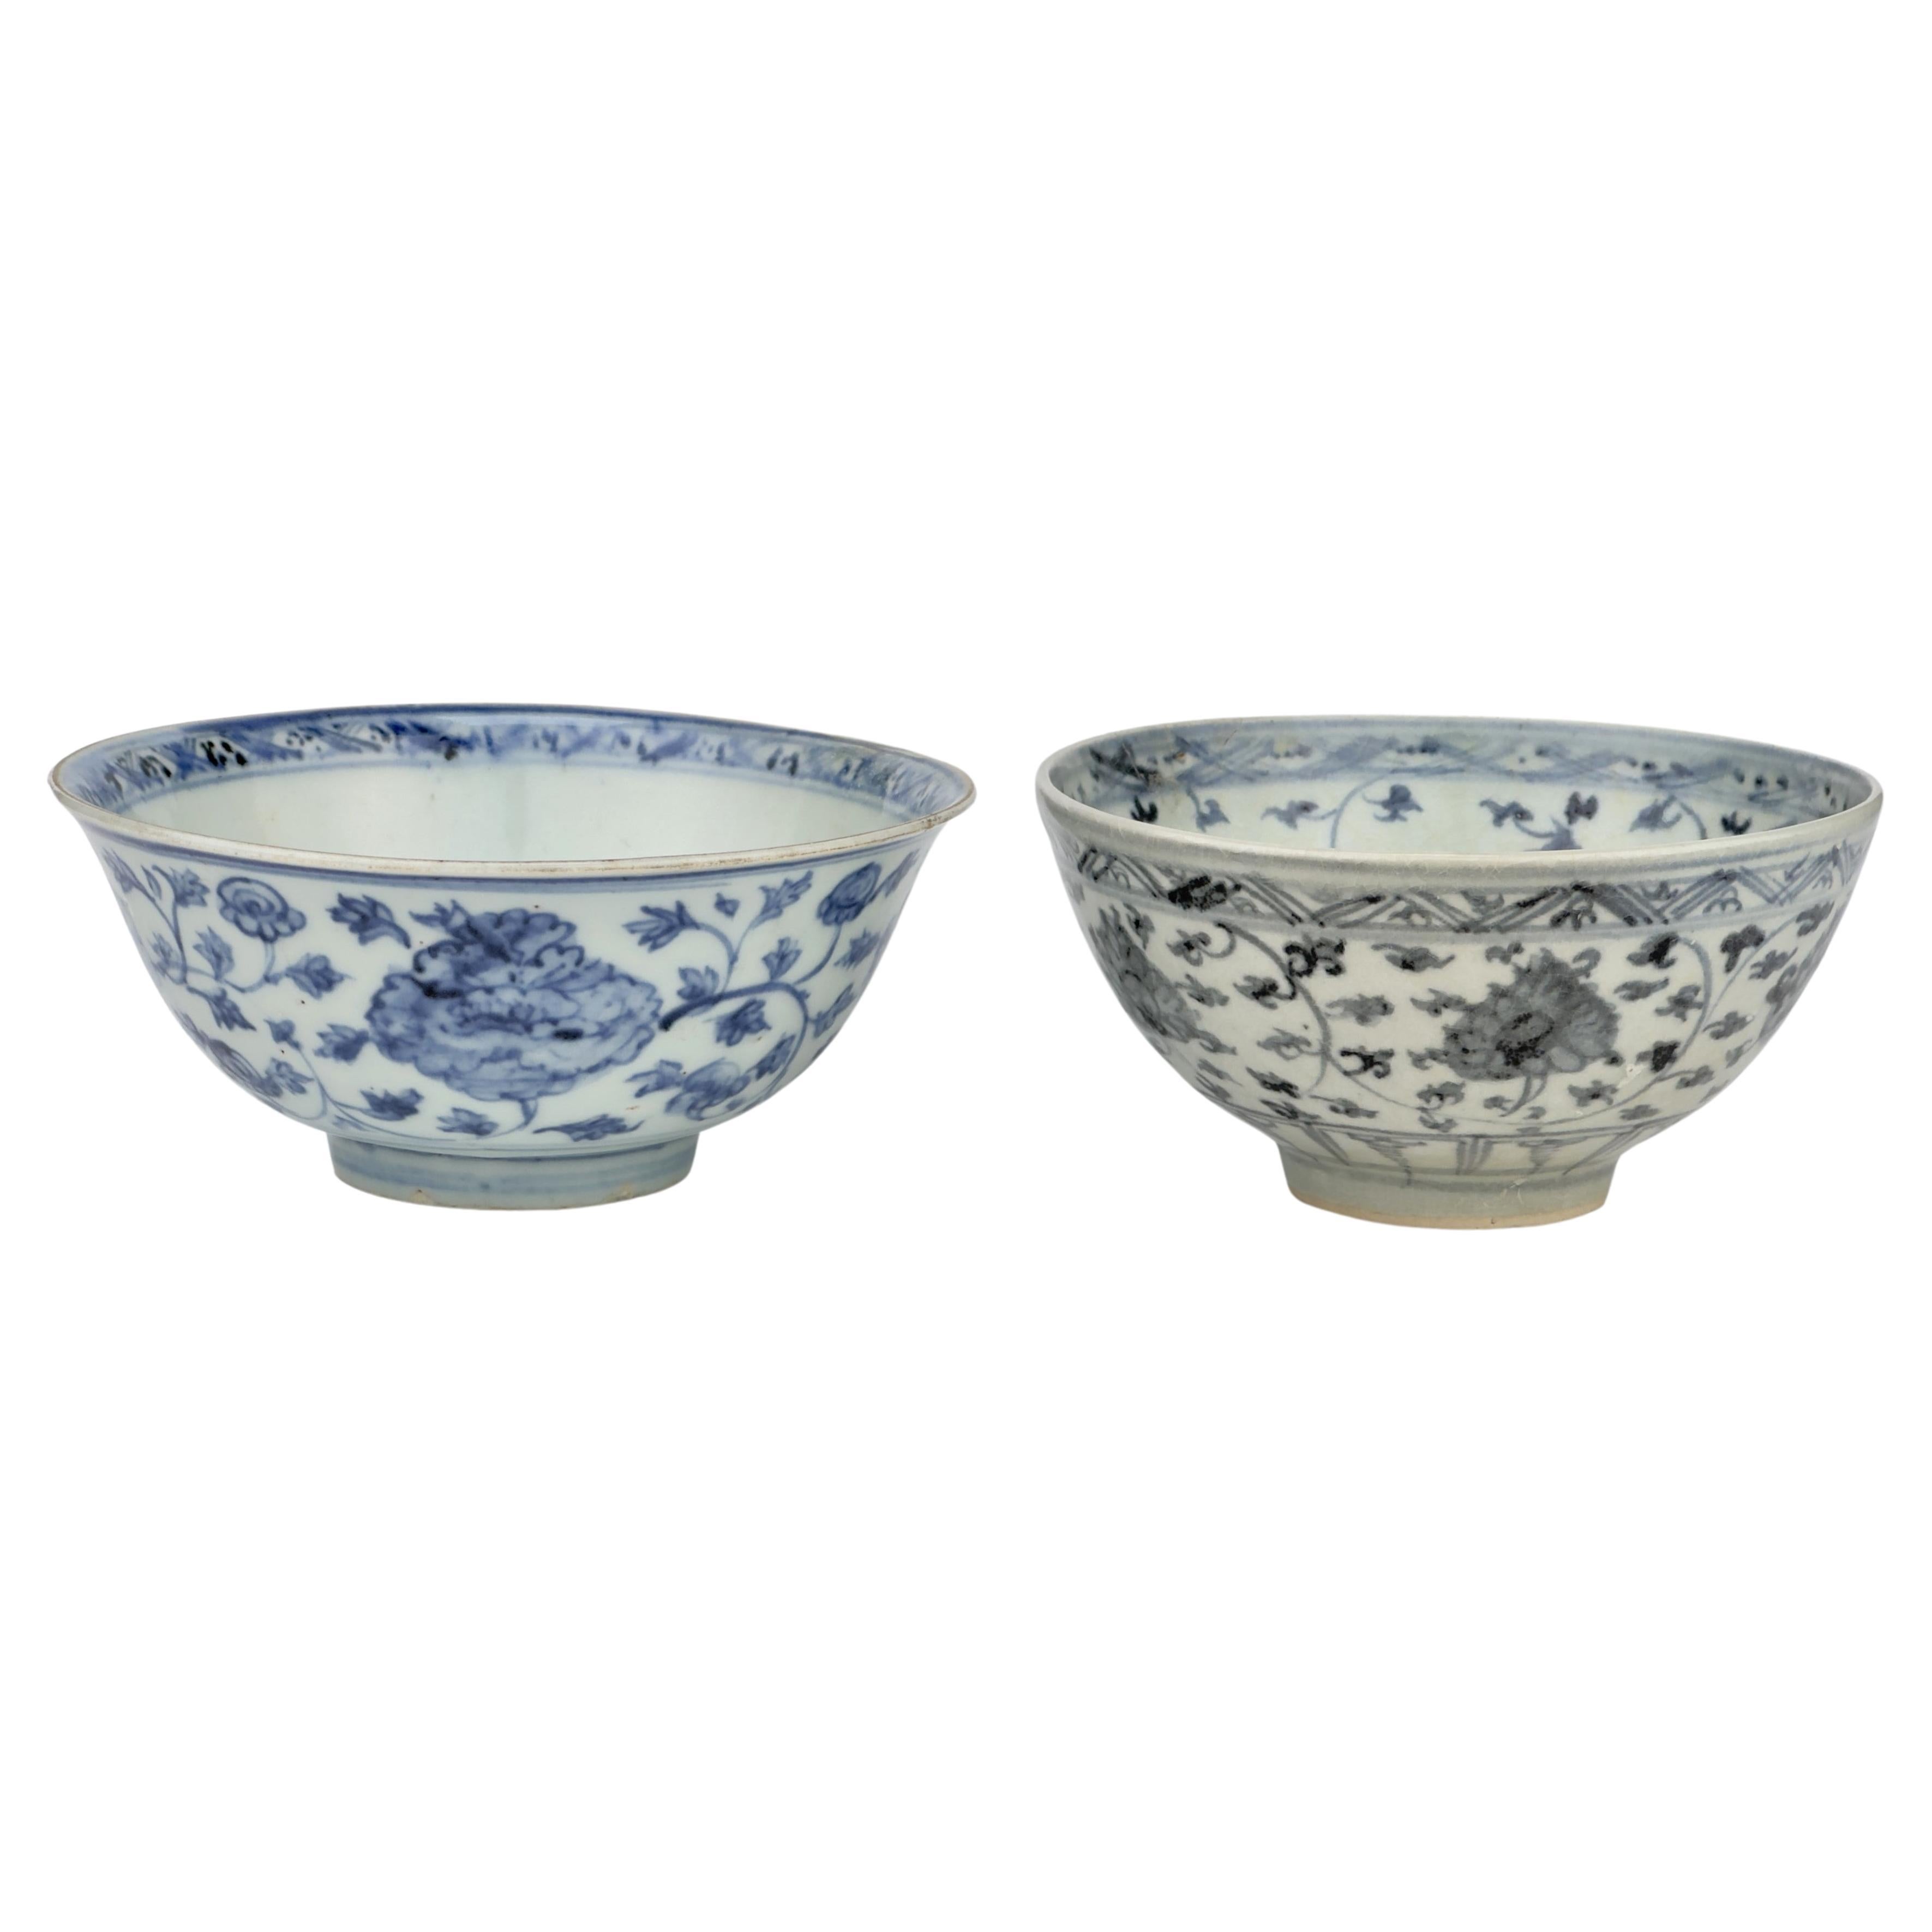 Two Bowls with knot shaped design on inside, Ming Era(15th century) For Sale